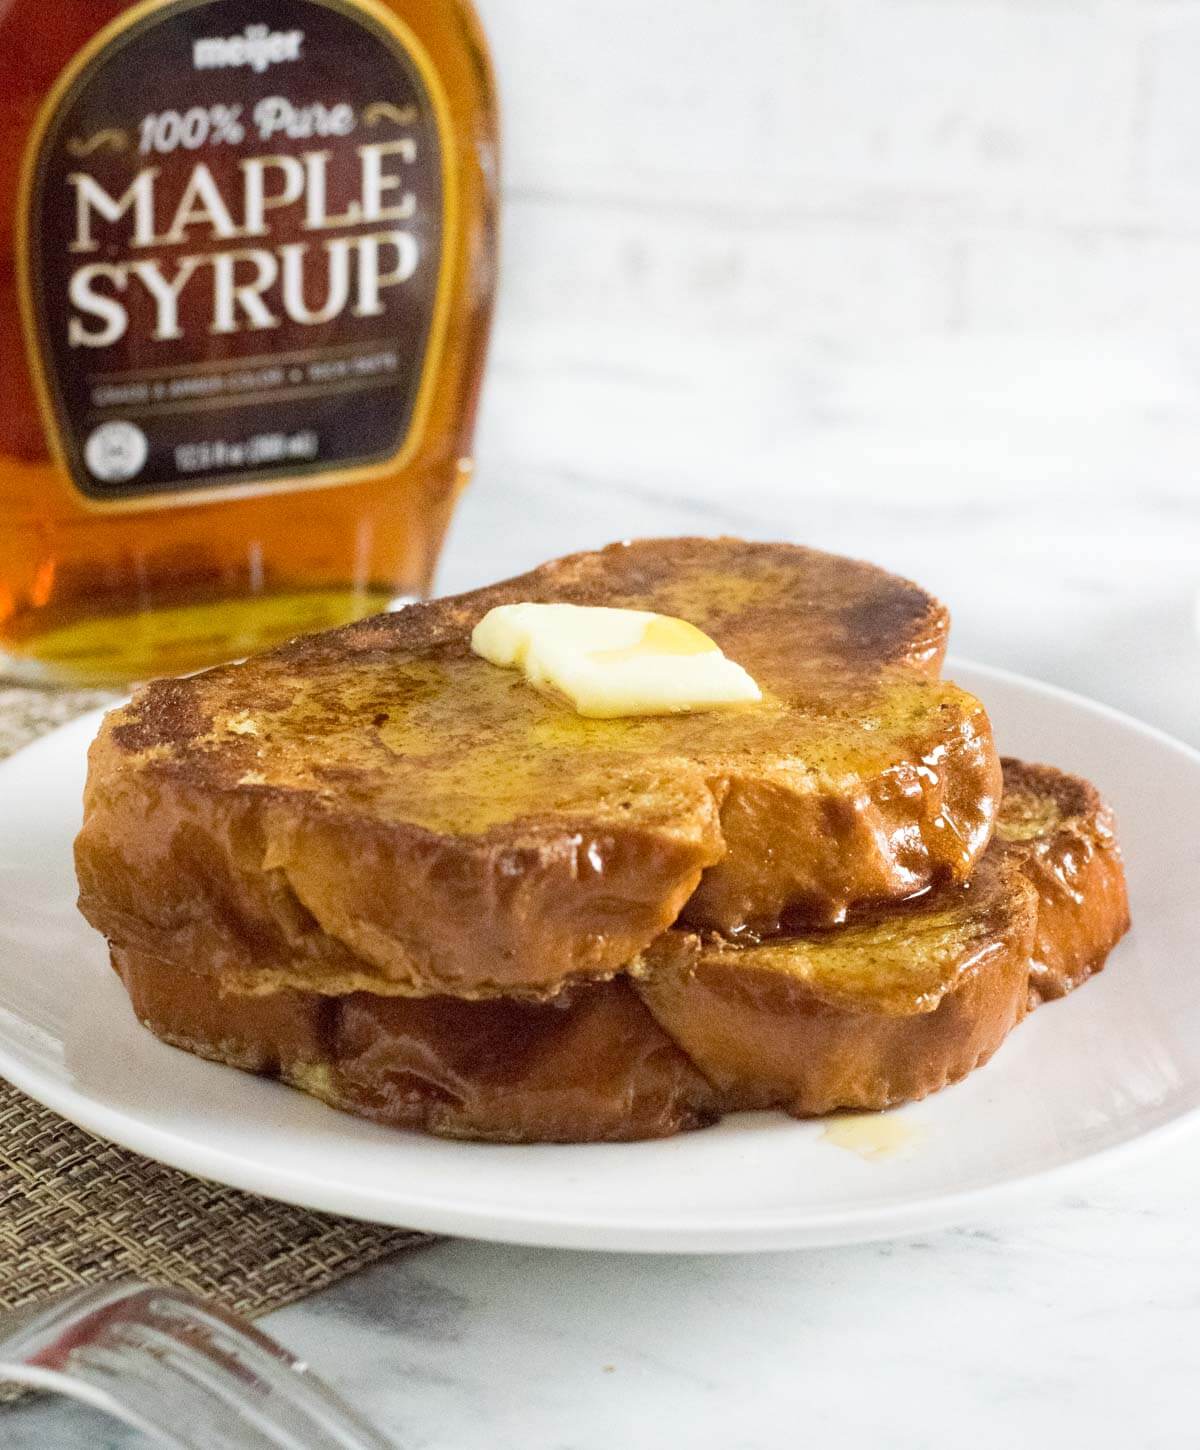 French toast served with maple syrup.